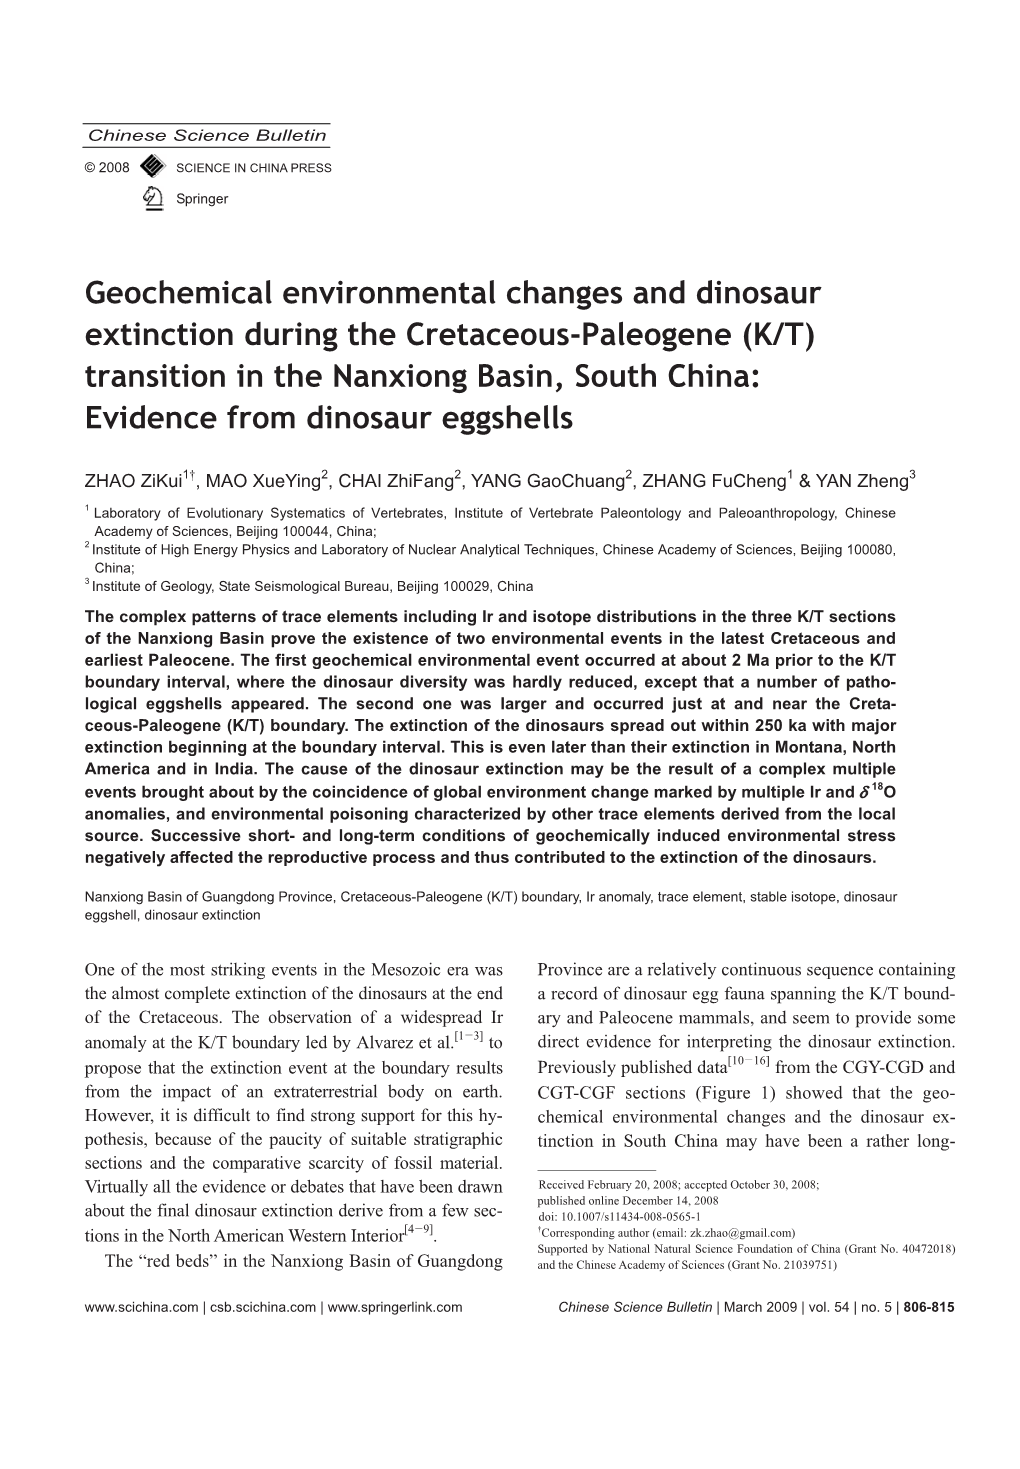 Geochemical Environmental Changes and Dinosaur Extinction During The